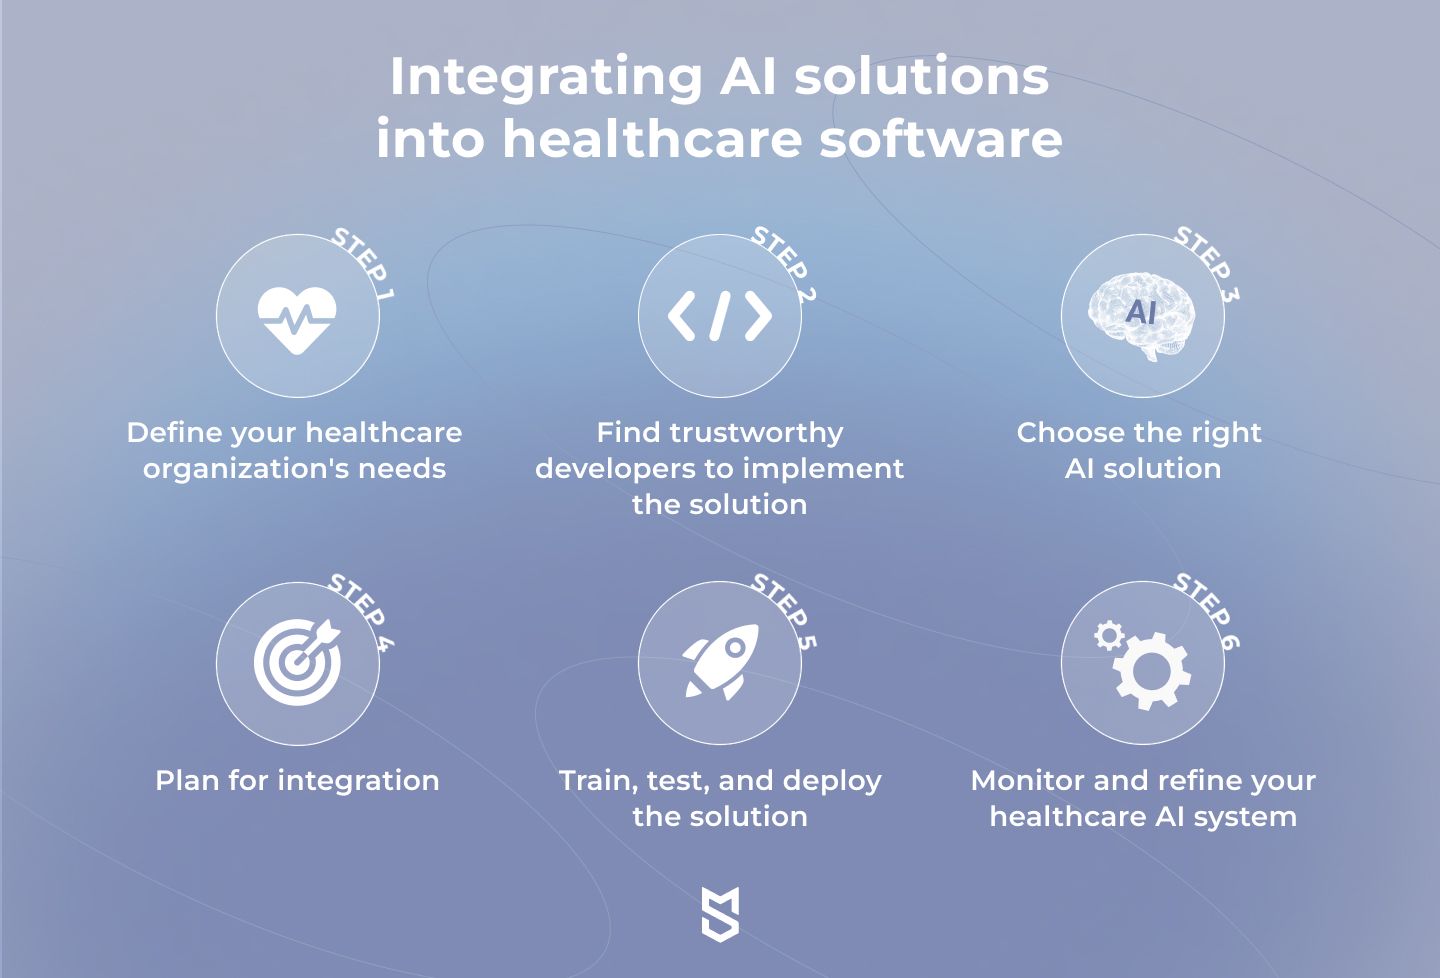 Integrating AI solutions into healthcare software